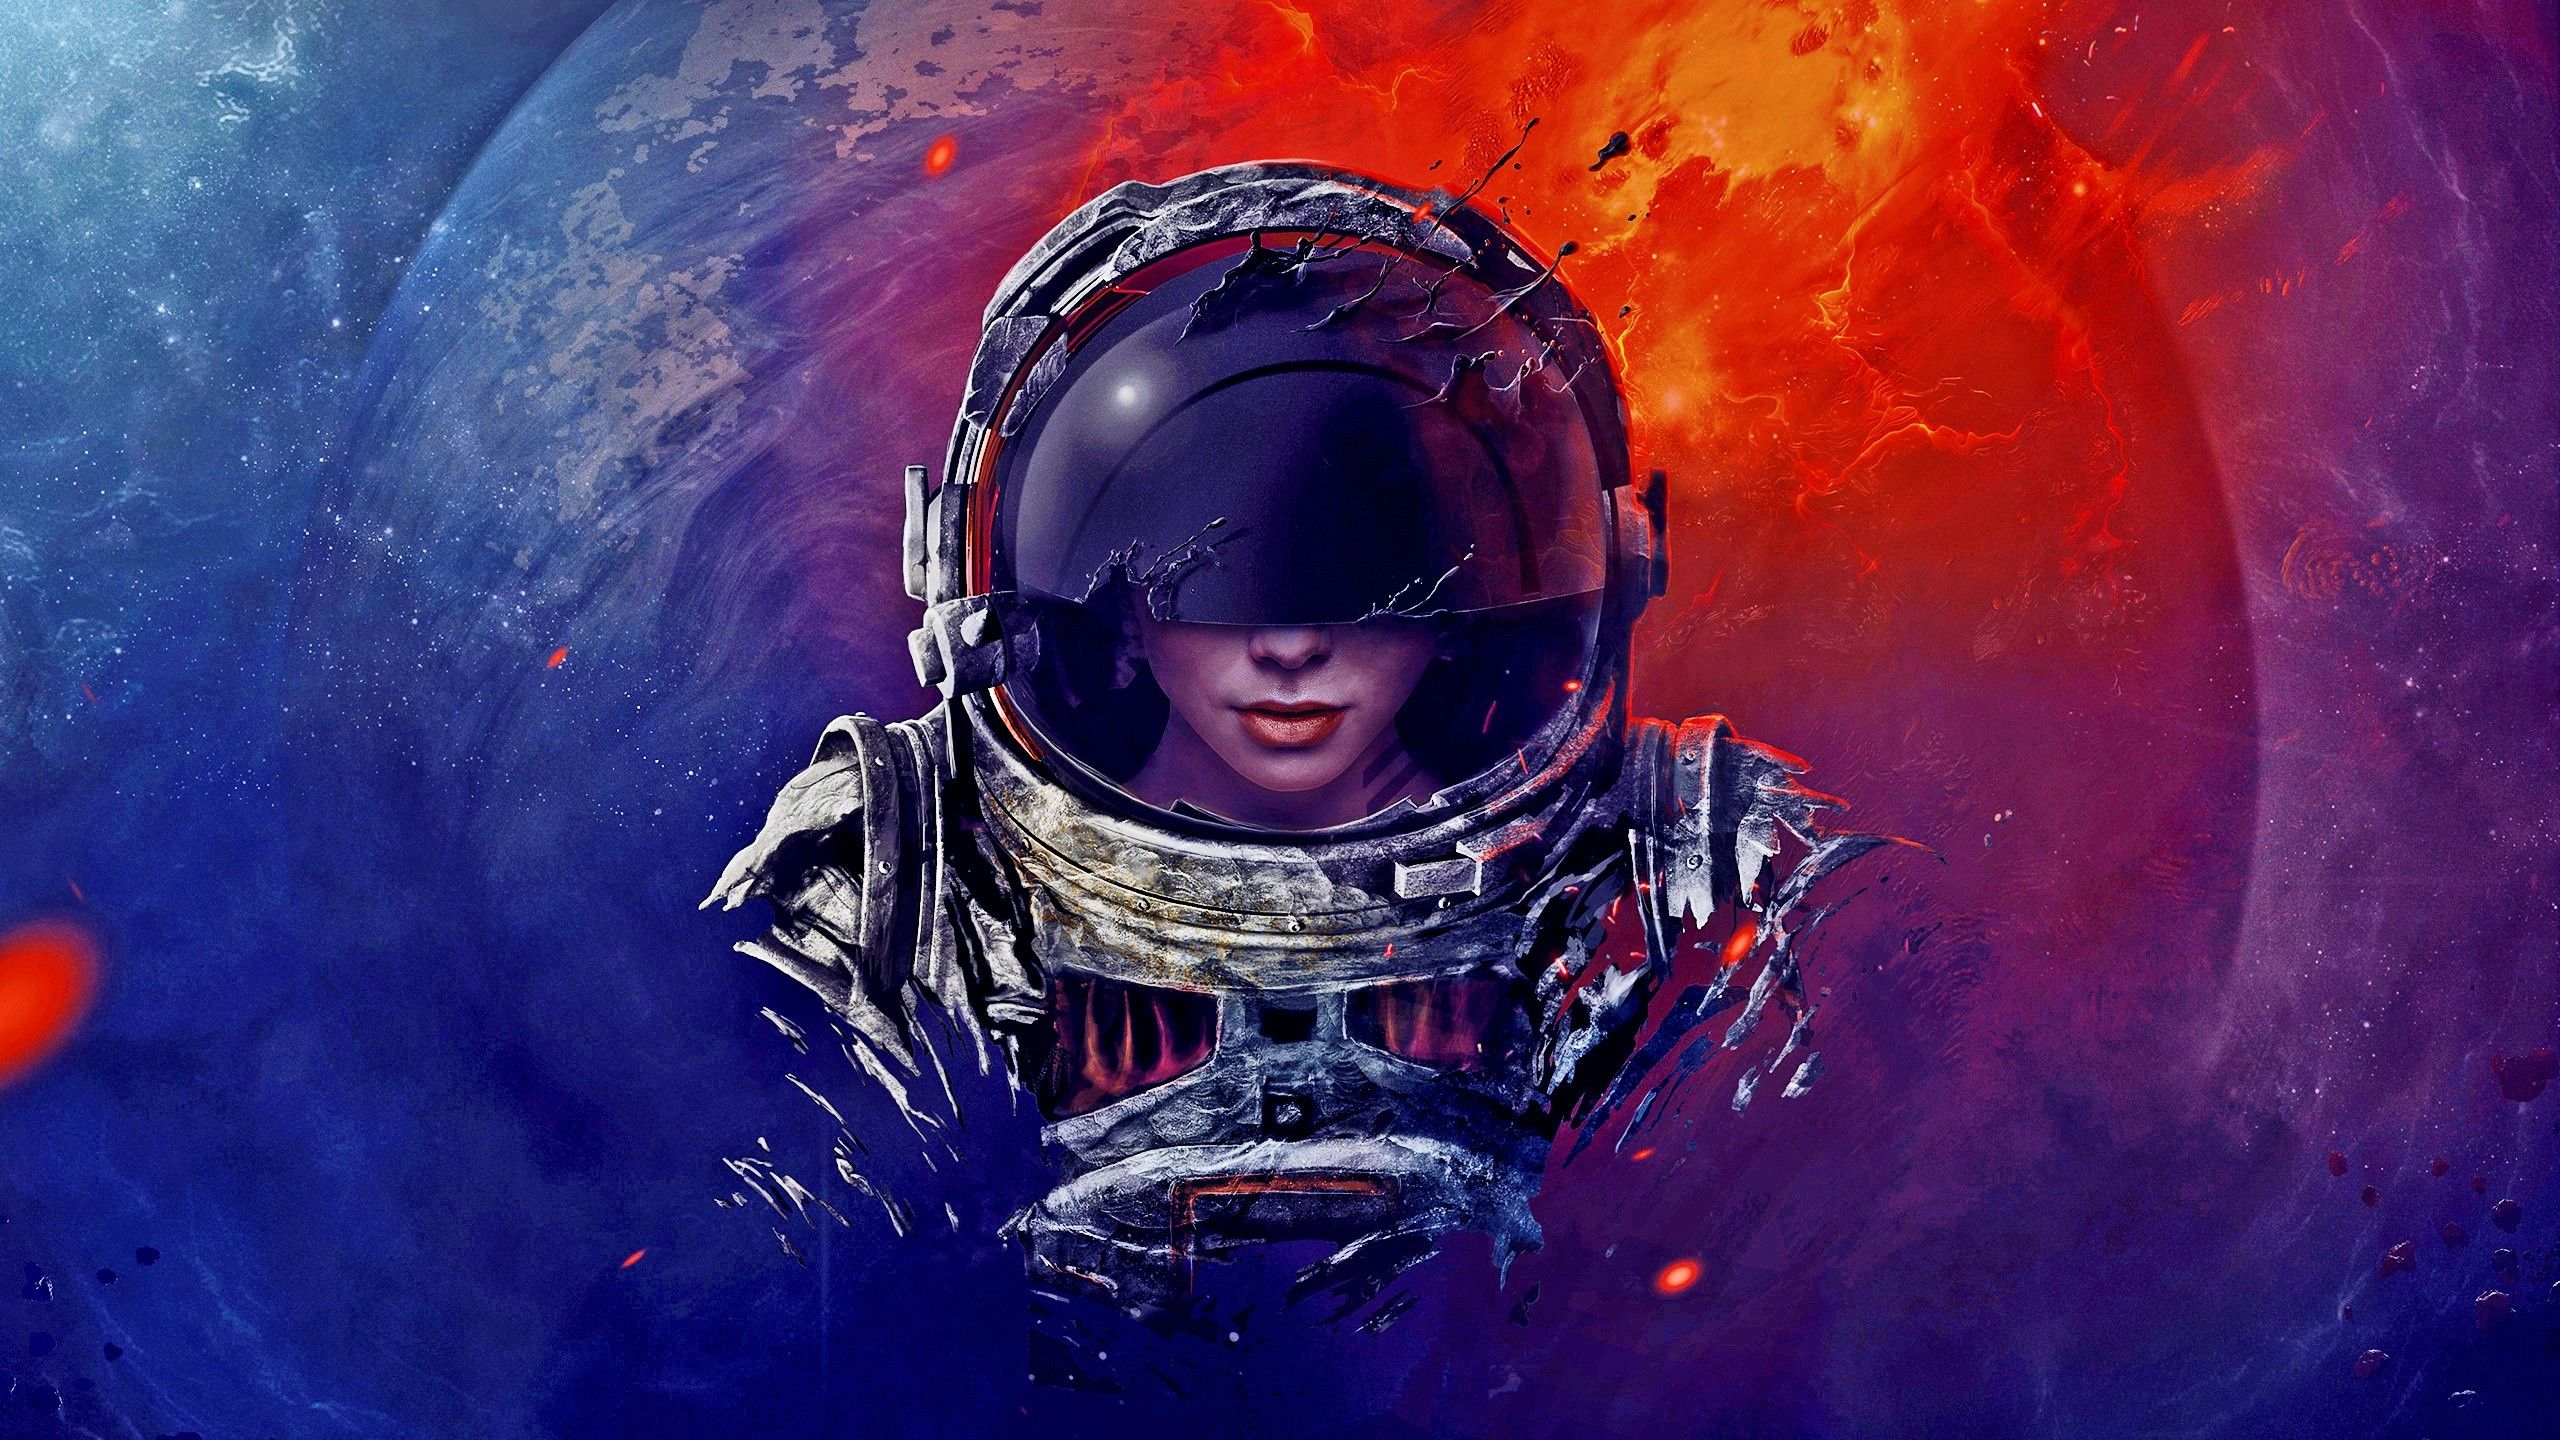 Astronaut Space Screensaver Anime Wallpapers - Wallpaper Cave